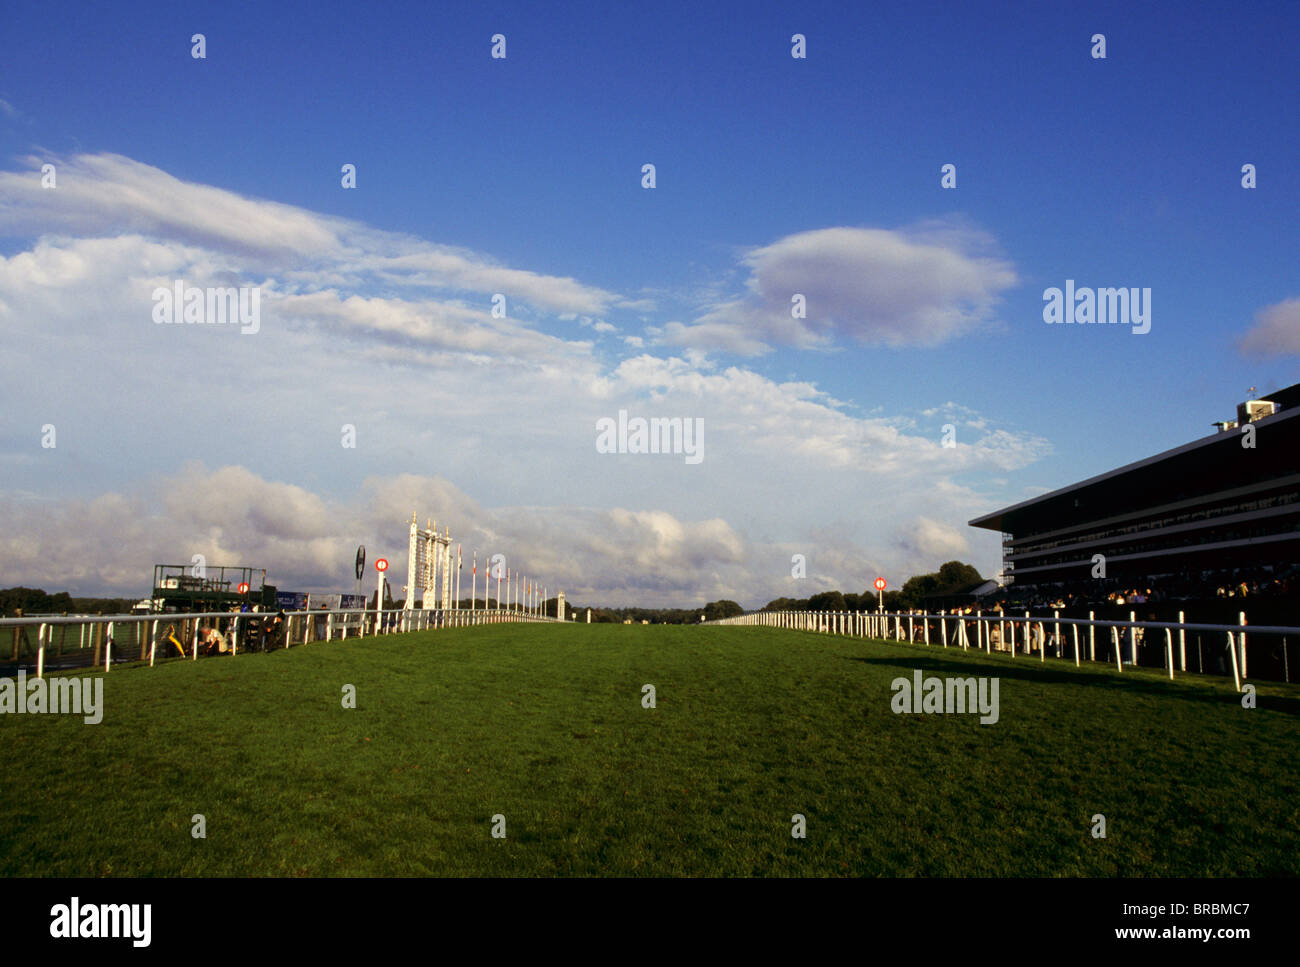 Horse racing track finish post with no people Stock Photo